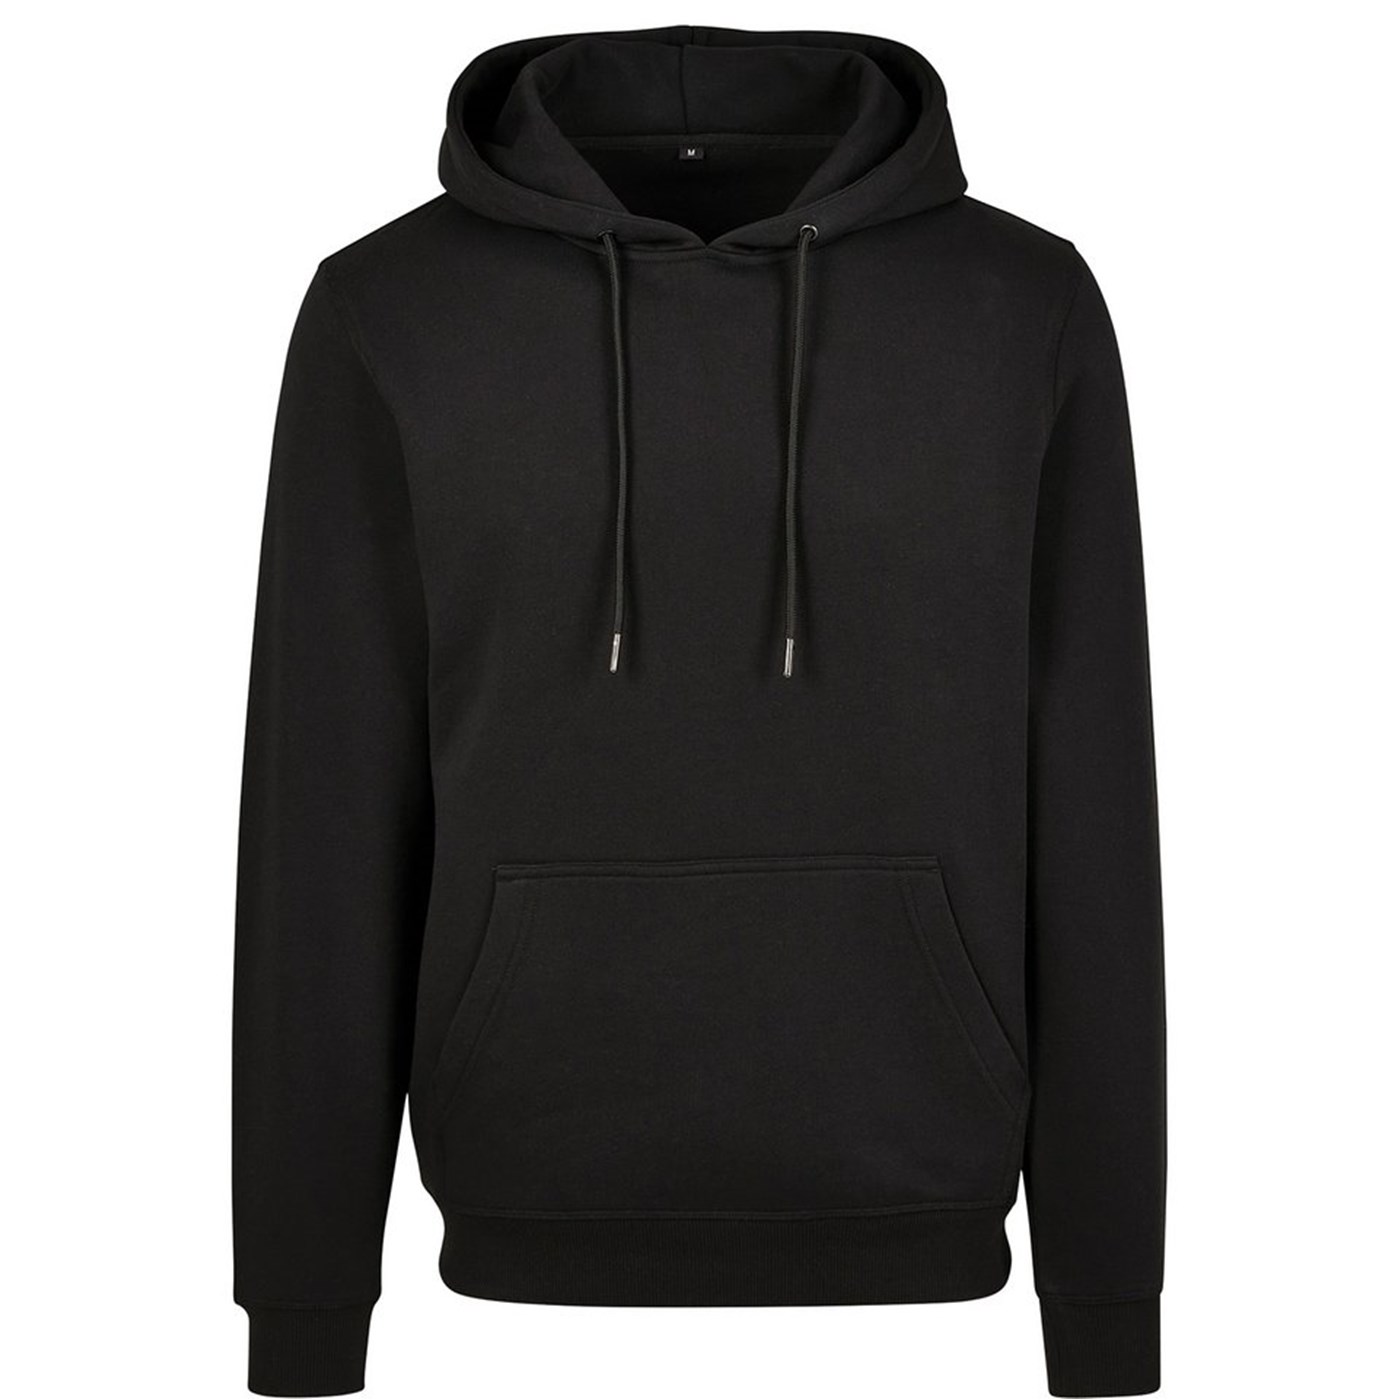 Build Your Brand Premium hoodie BY118